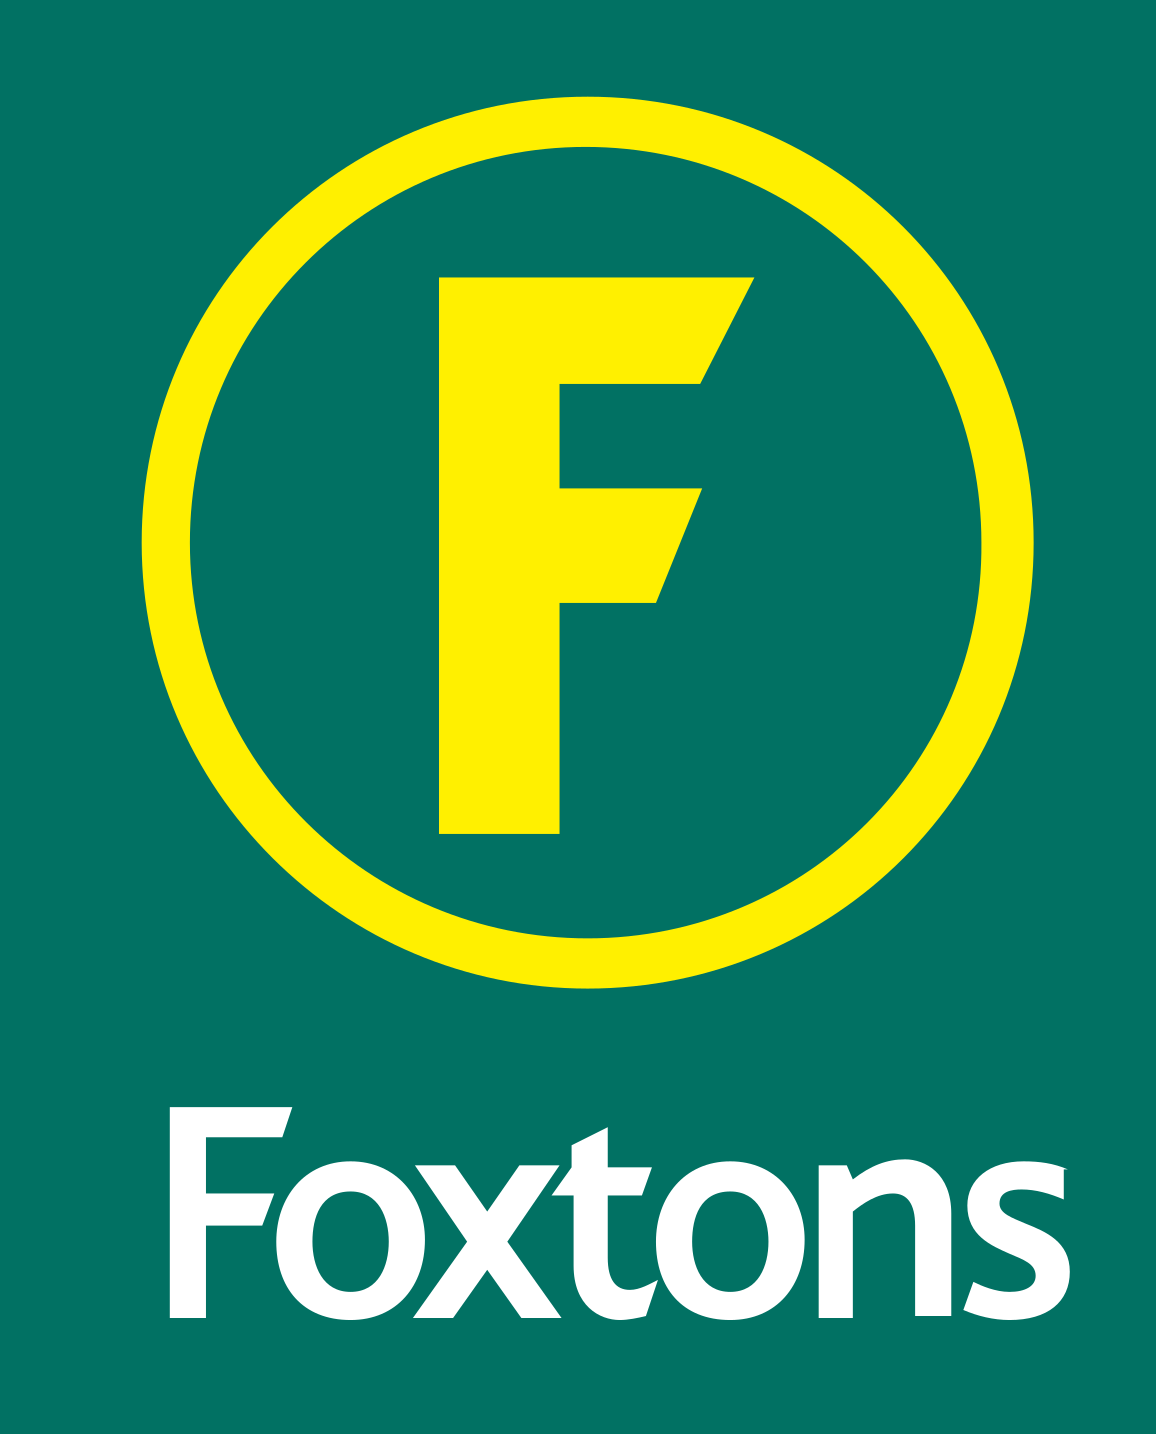 foxtons-sees-significant-growth-in-revenue-as-operational-turnaround-progresses